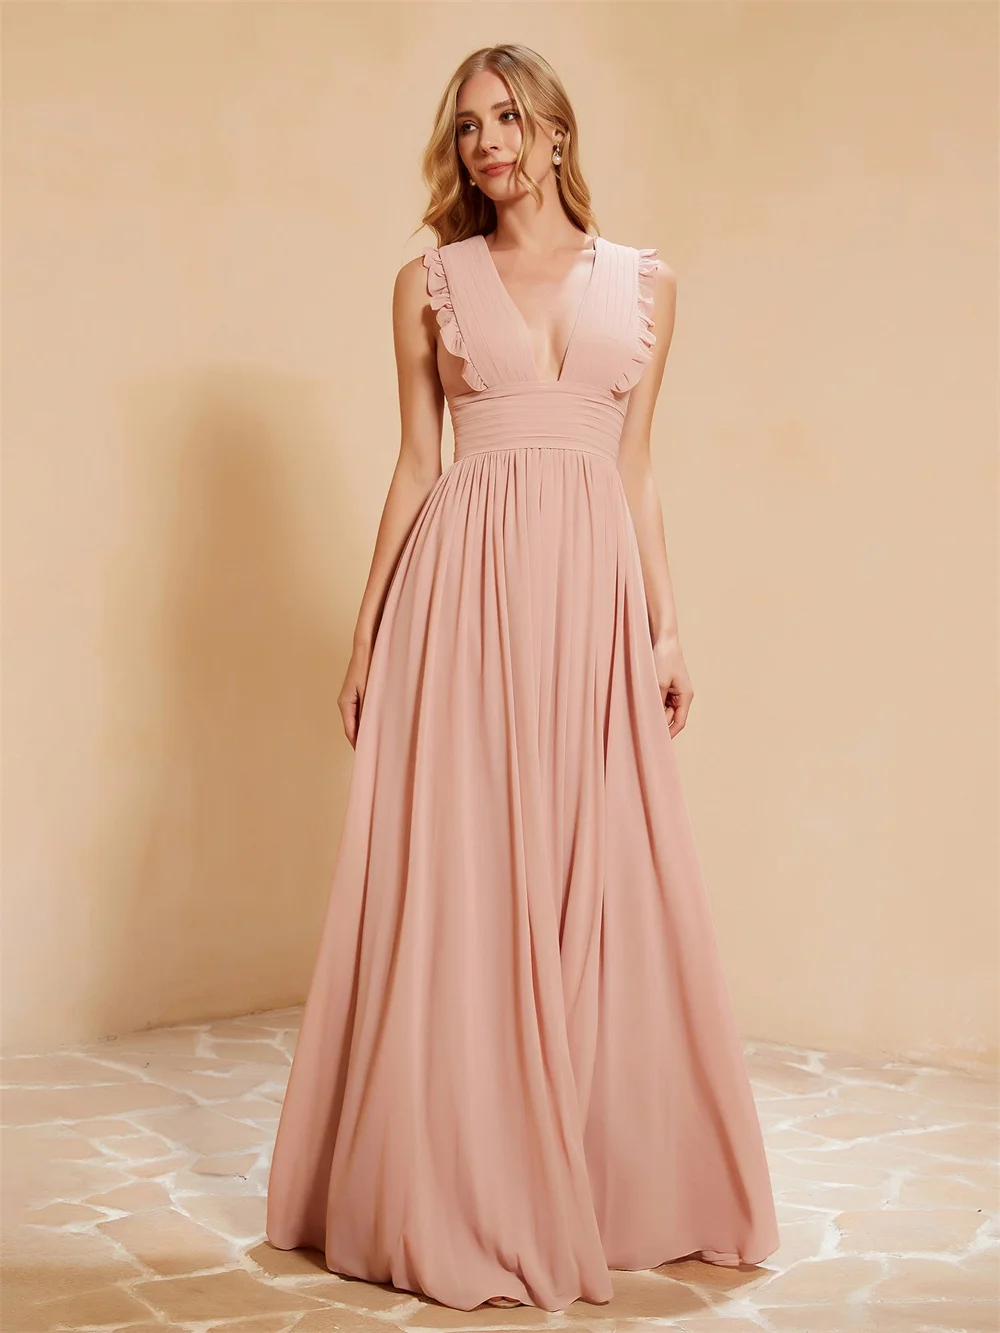 

Off the Shoulder Ruffles V-neck Bridesmaid Dresses With Split Side Pleated Corset Evening Dress A-line Sleeveless Long Ball Gown